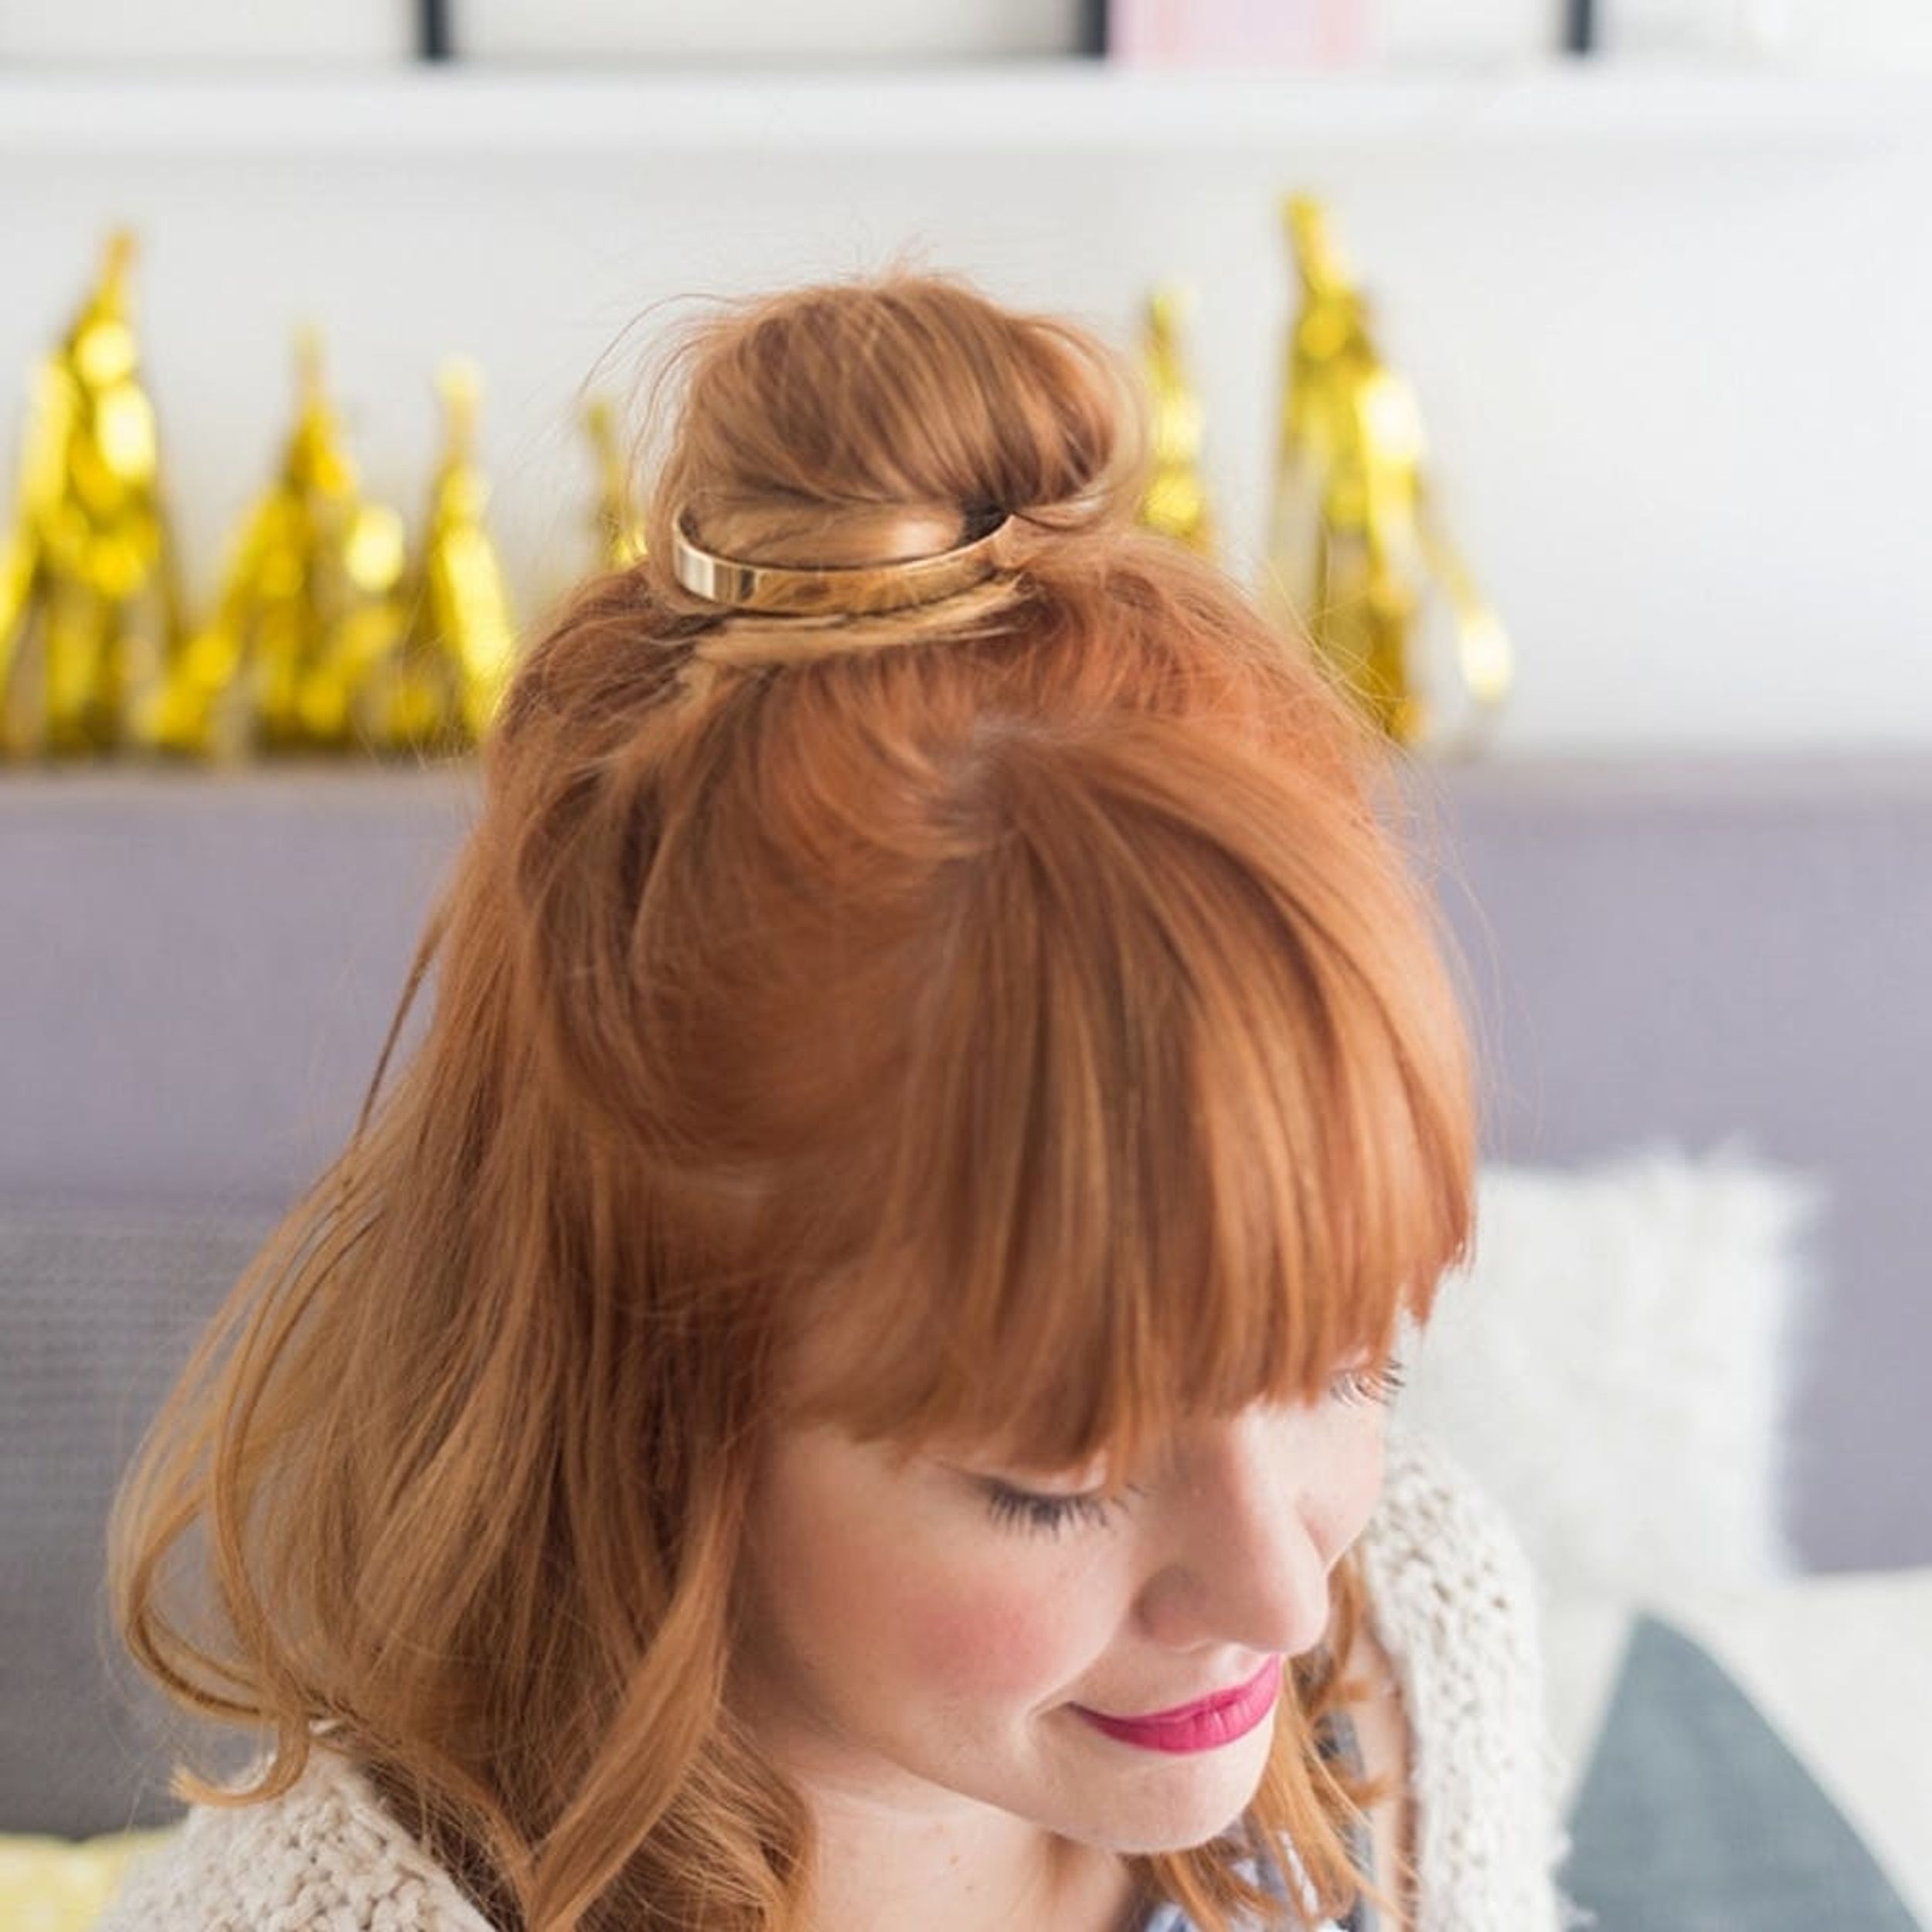 How to Turn Your Old Cuff Bracelet into the Trendiest Hair Accessory